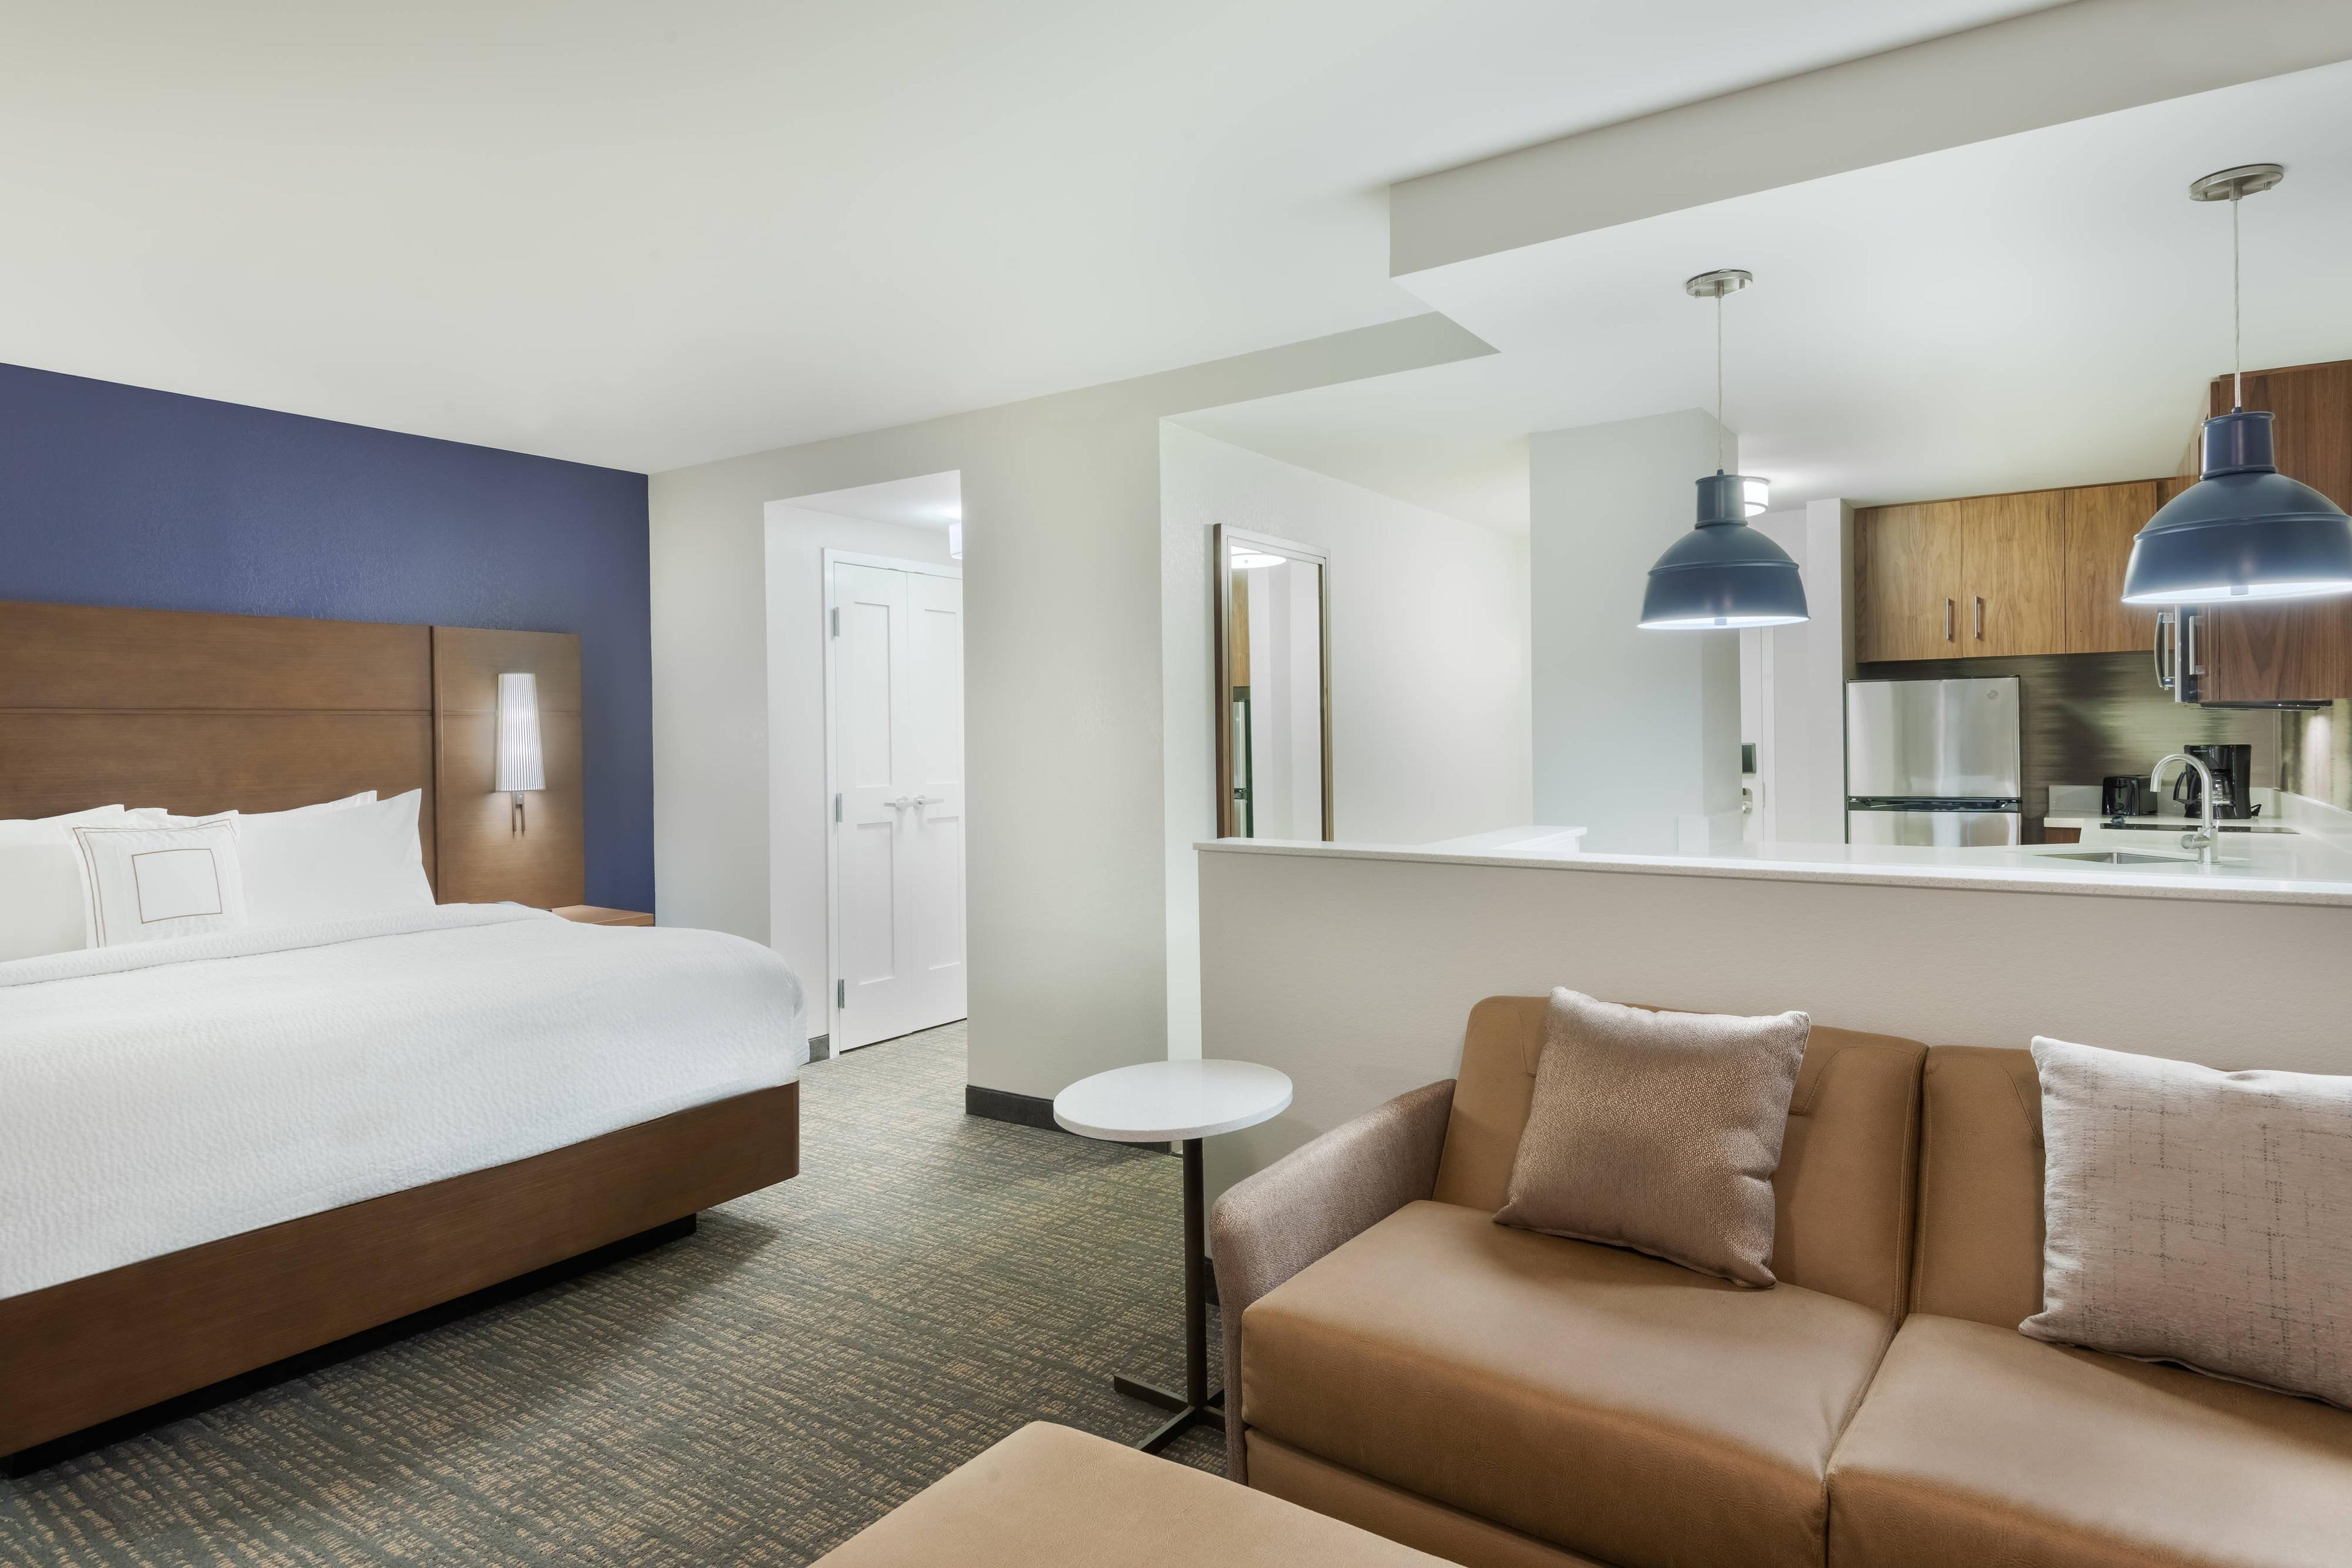 Stream Pandora on the SMART TV while you cook dinner from the fully equipped kitchen, or watch Netflix from the comfort of your luxurious bed. After all, we want you to feel at home in your suite.